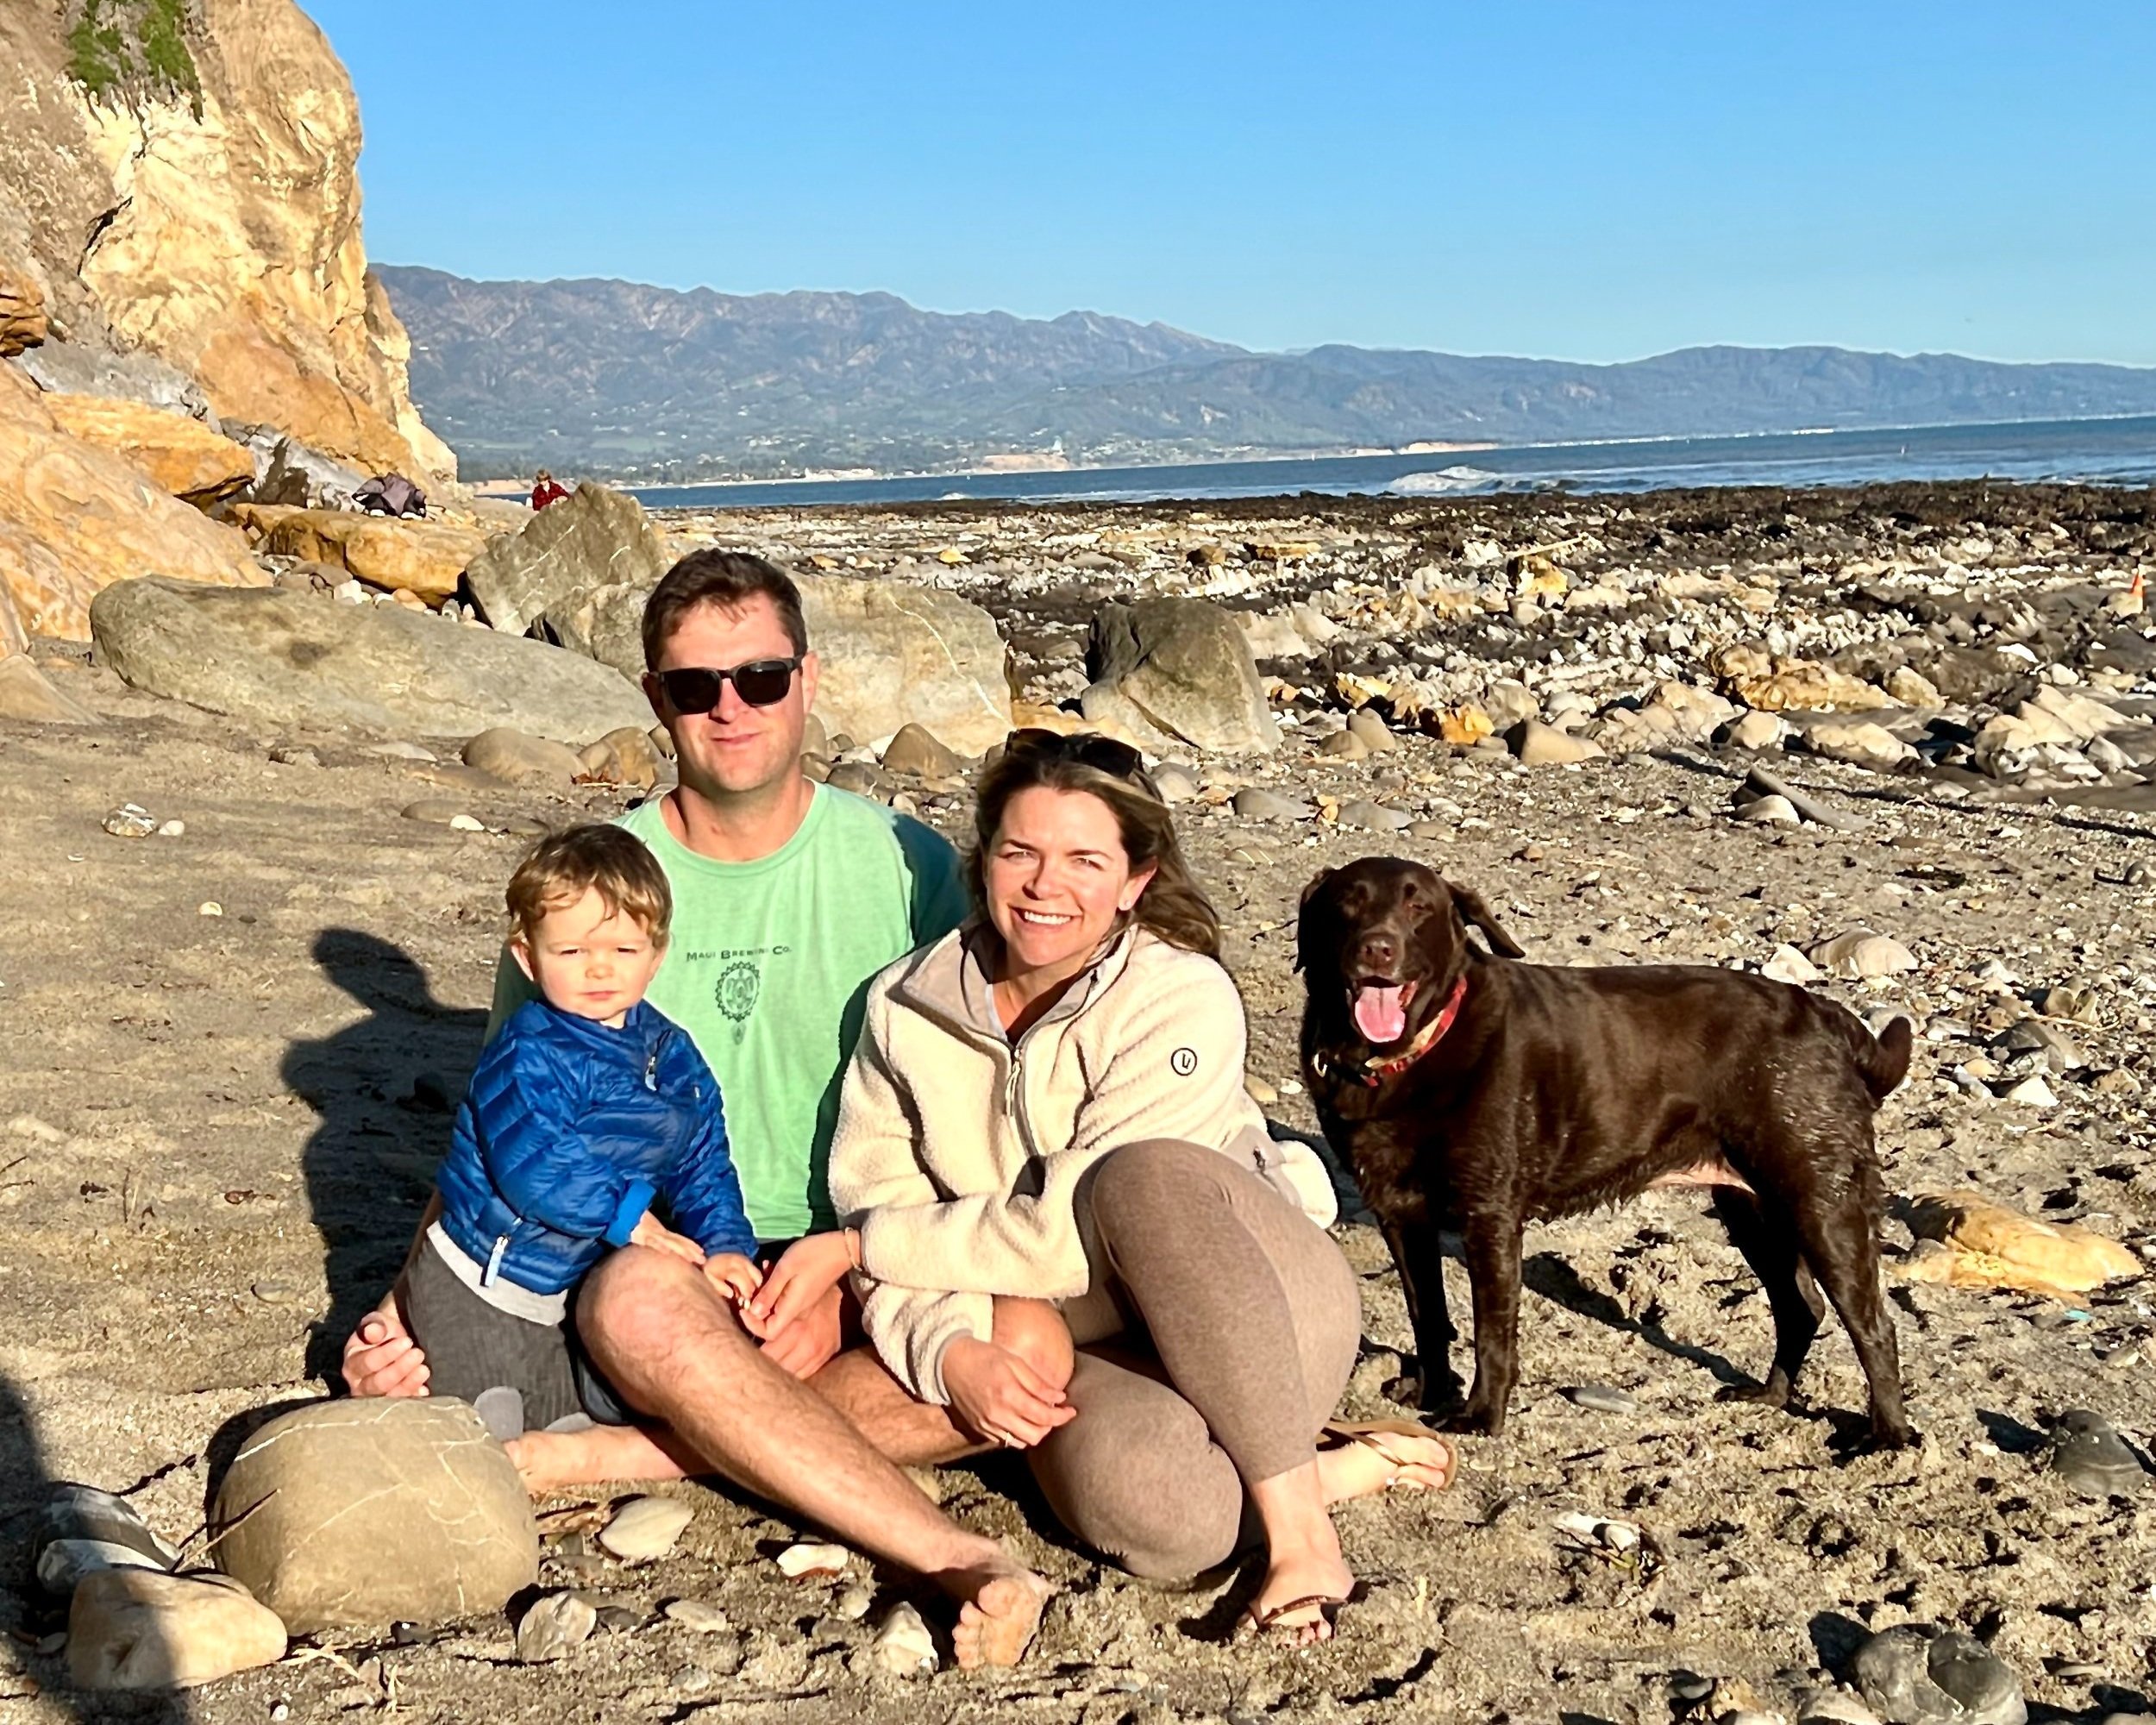  Sam Grant with his wife Emily, son Benjamin, and dog 